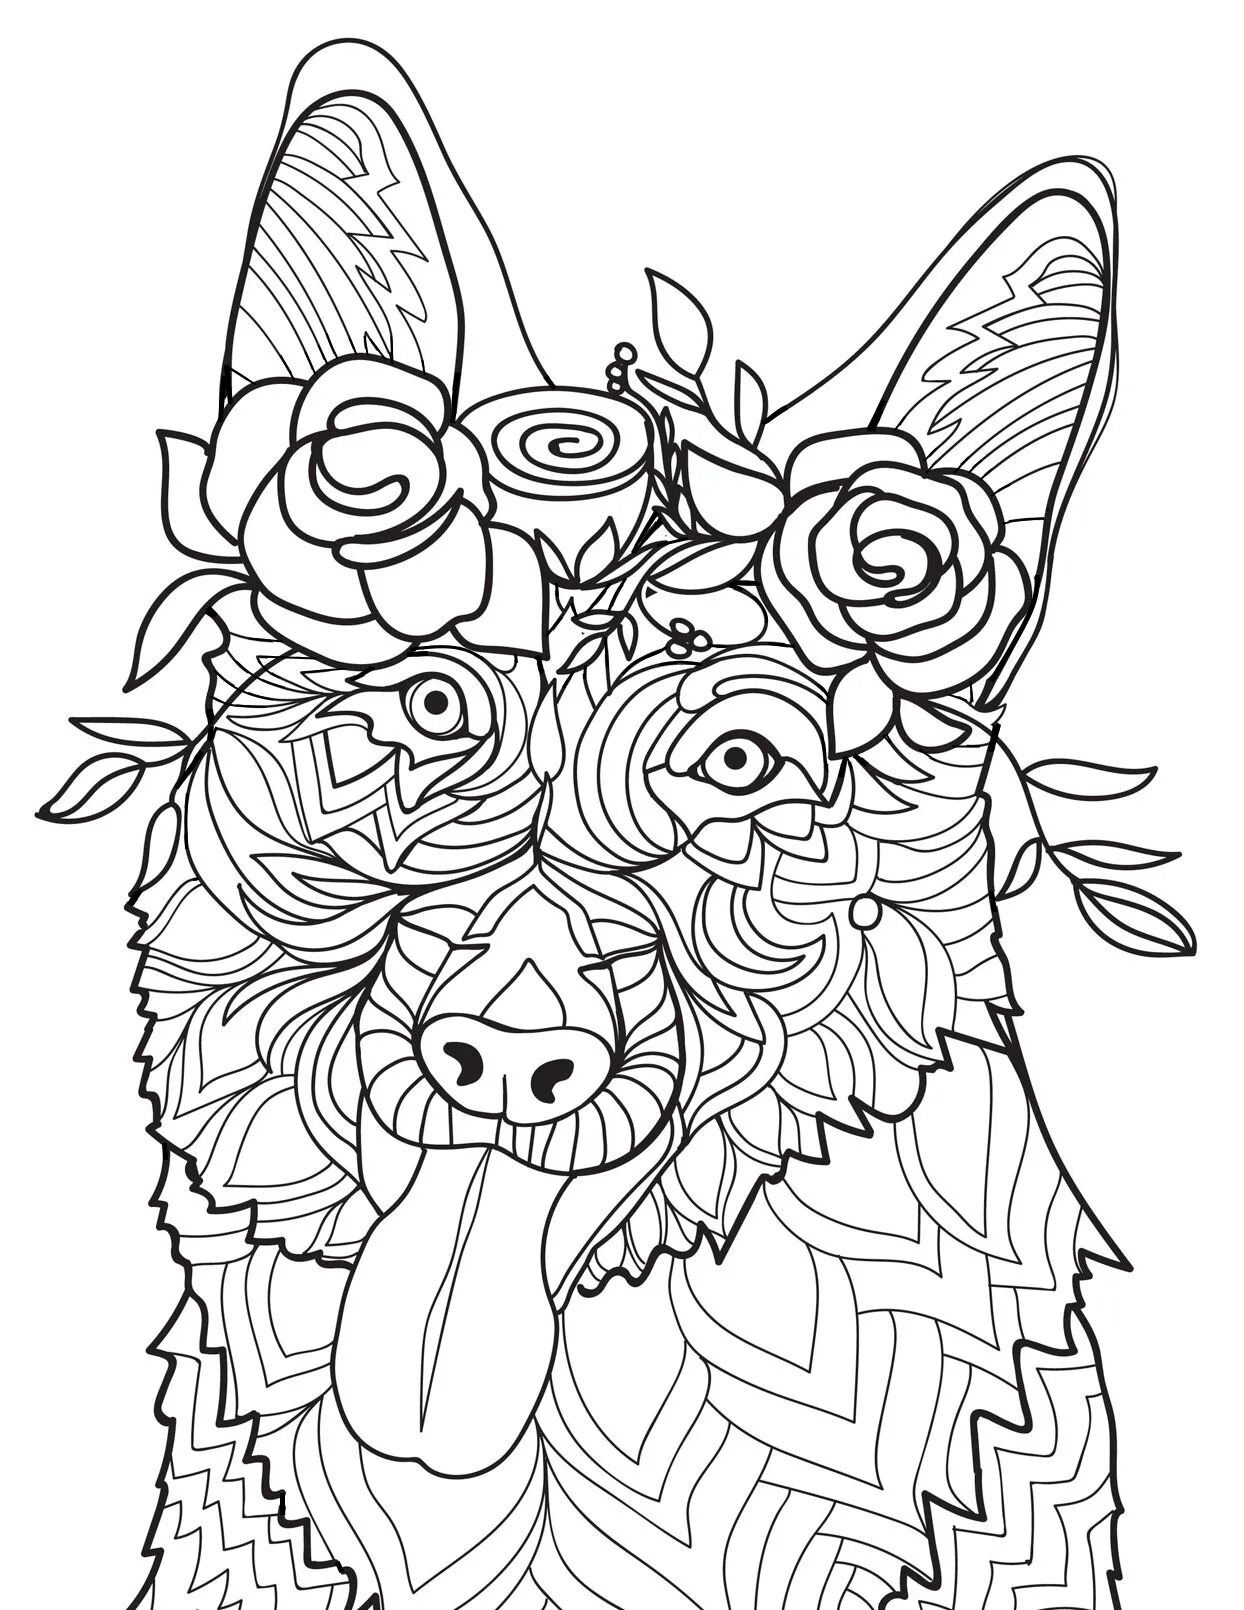 Exciting anti-stress dog coloring book